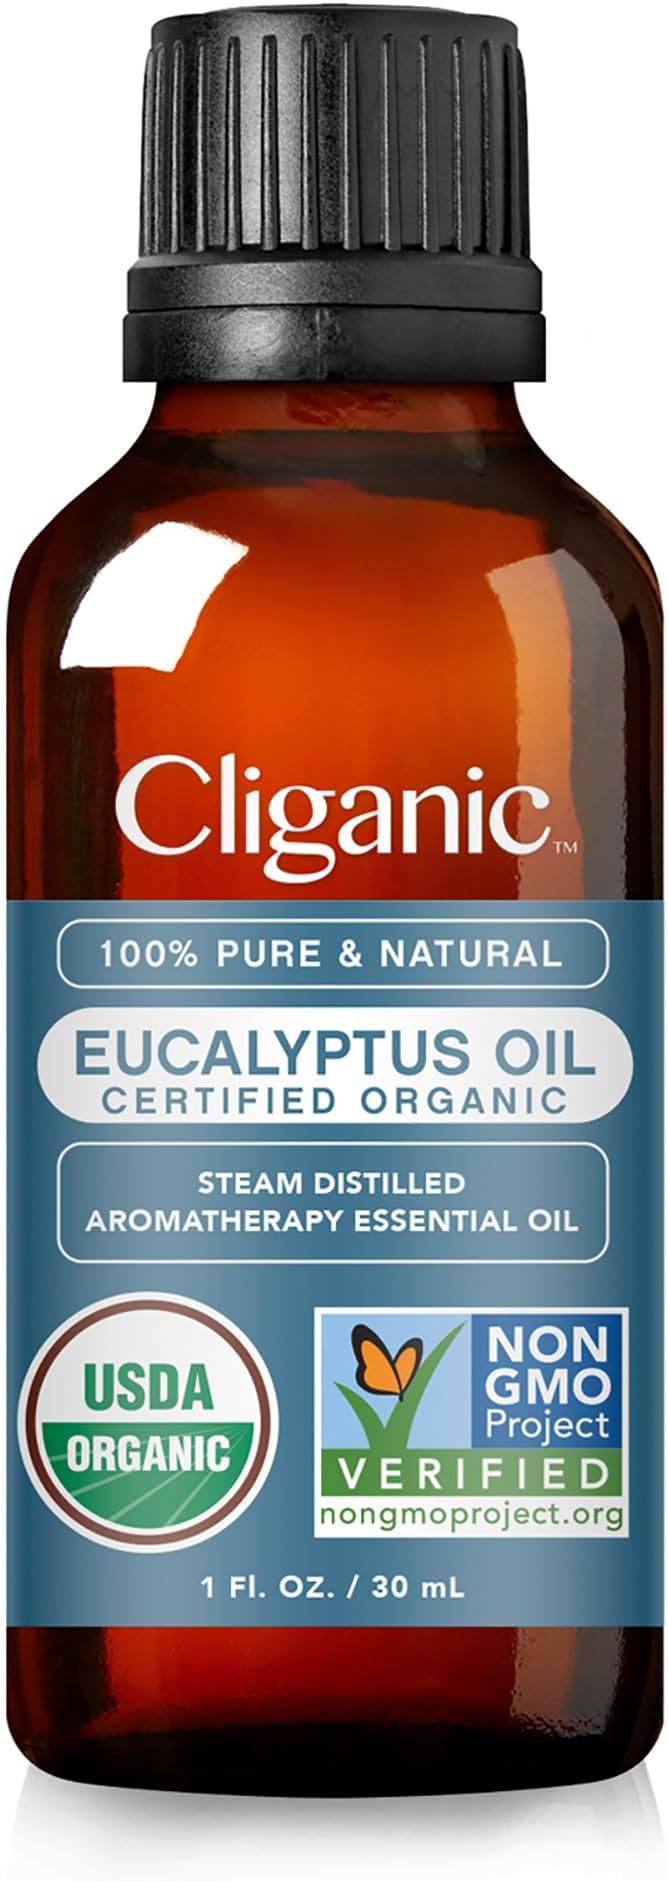 cliganic eucalyptus oil, one of the best things to add to your bath